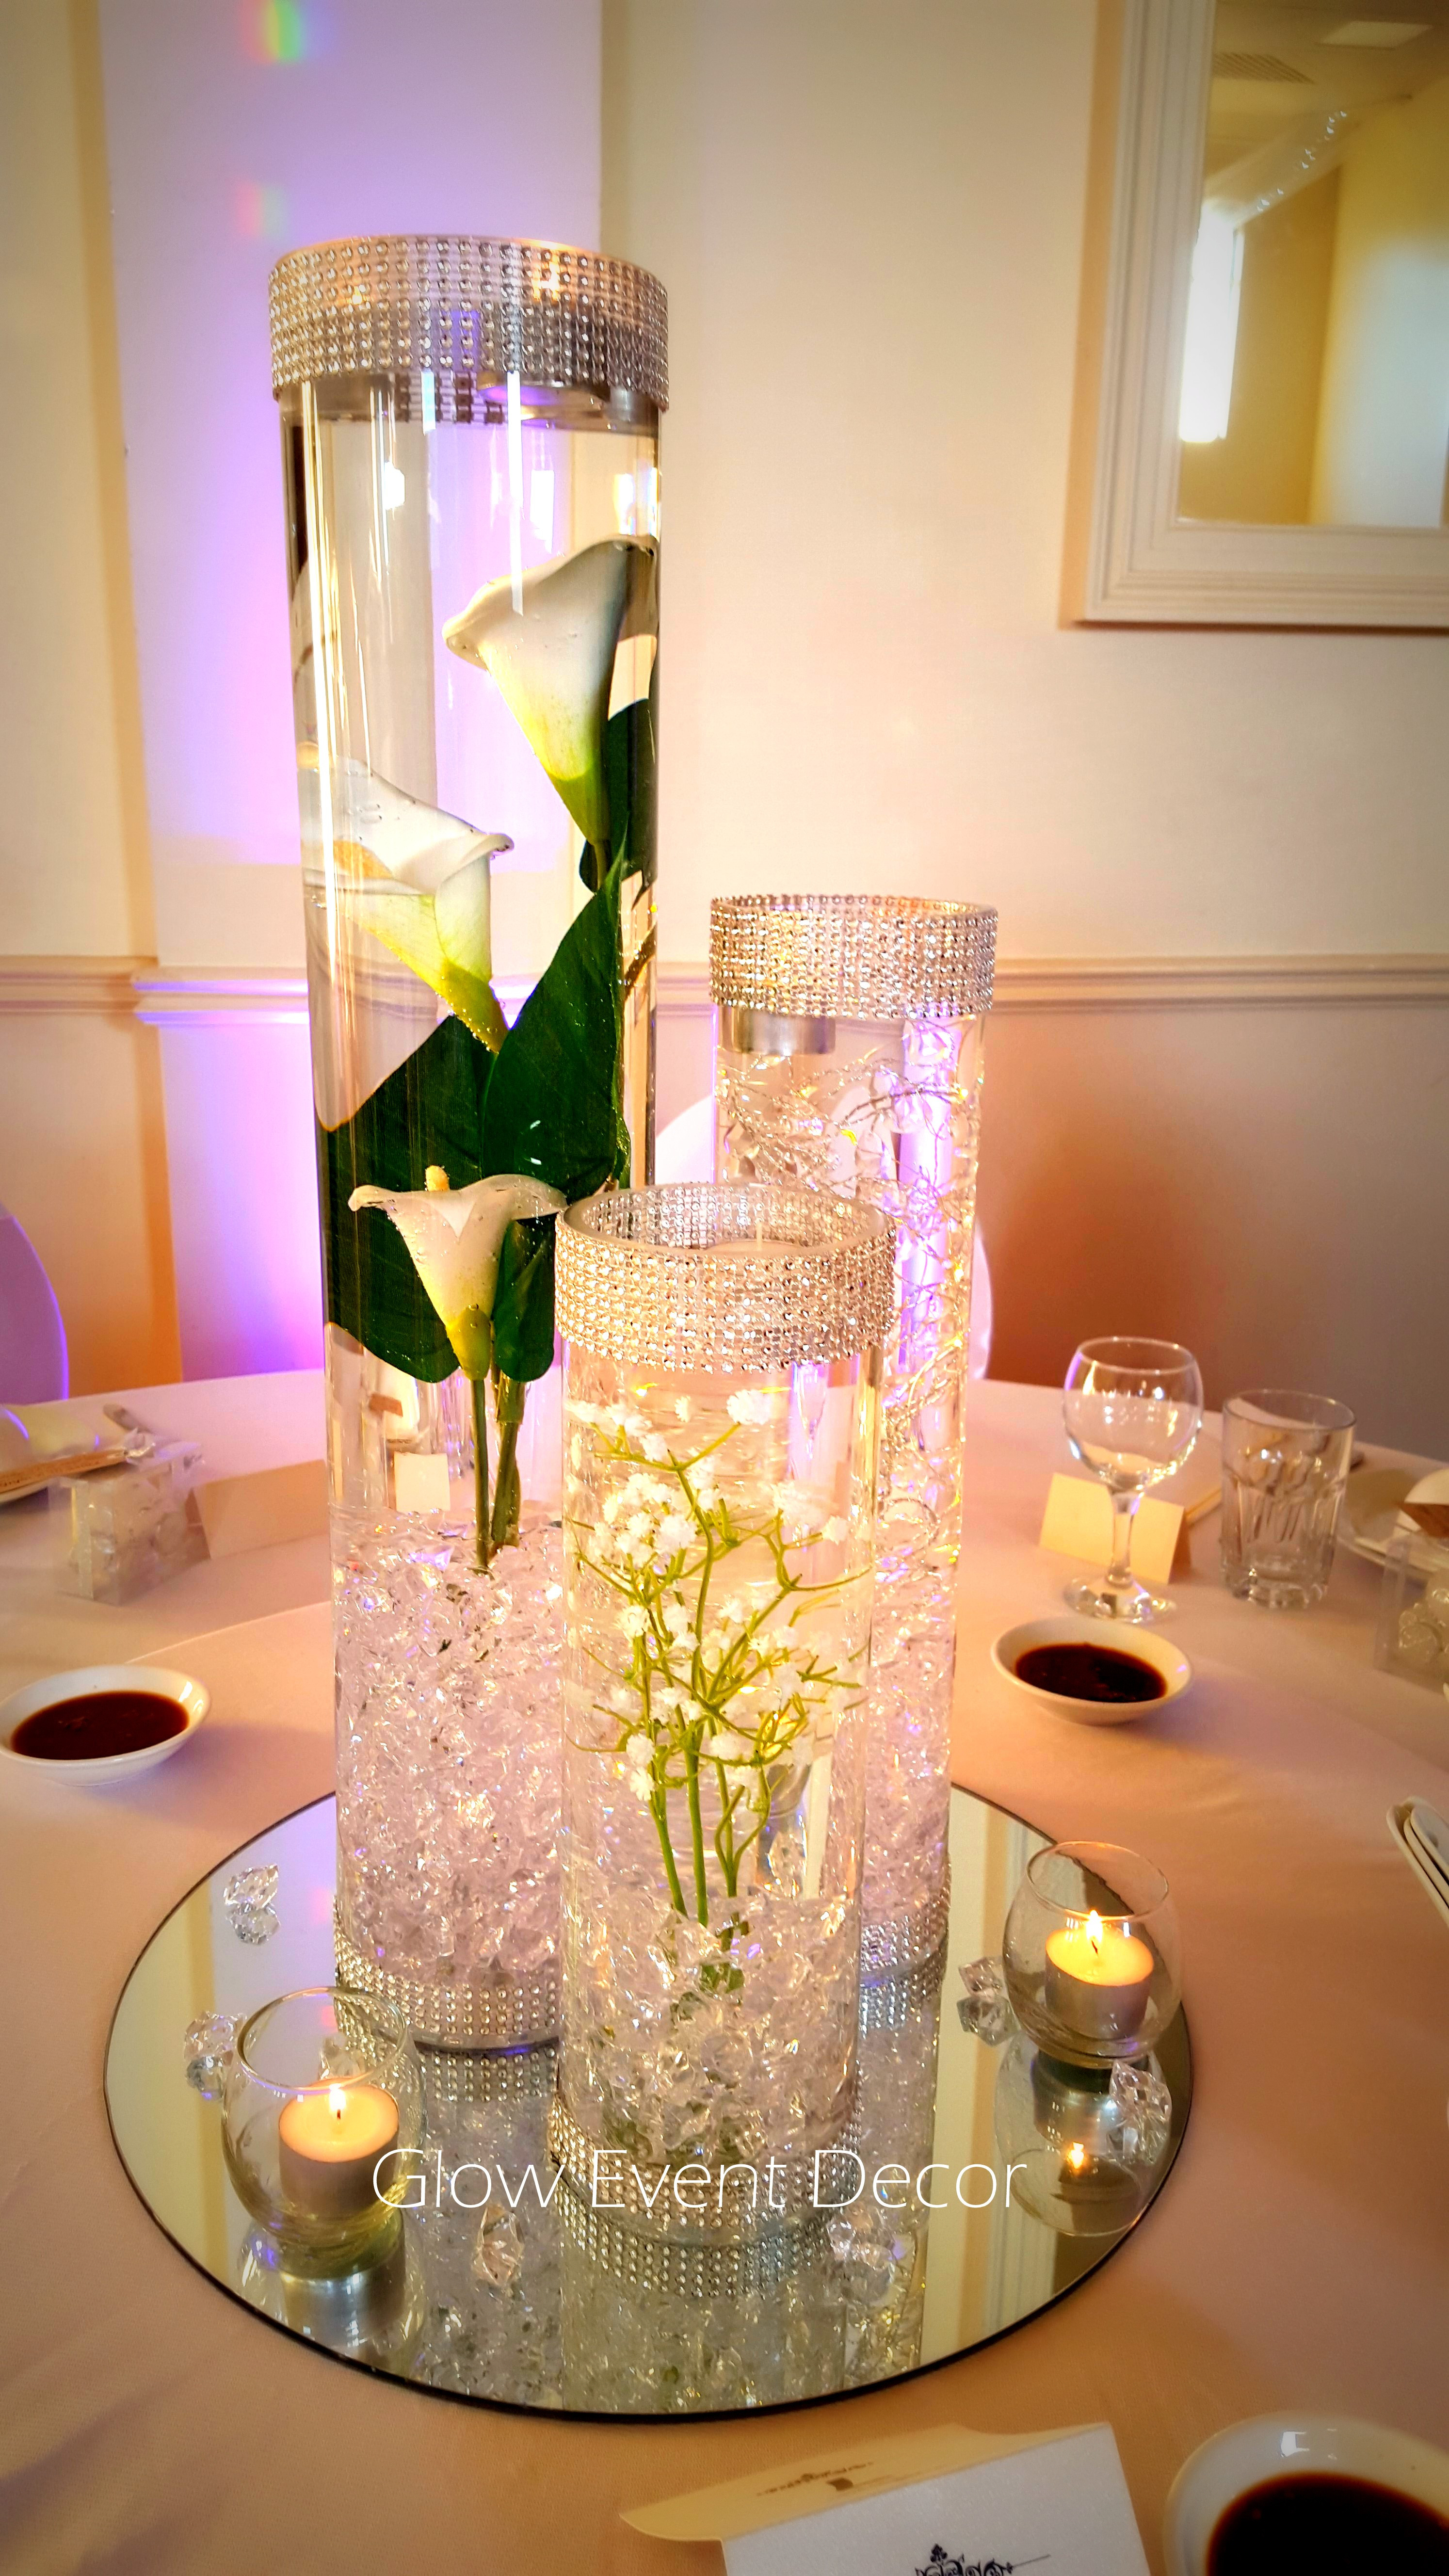 10 Fantastic Light Up Vases Weddings 2024 free download light up vases weddings of led orchid cylinder vase glow event decor throughout cylinder vase trio submerged lillies gyp sophlia bablies breath crystal garland for bridal 1